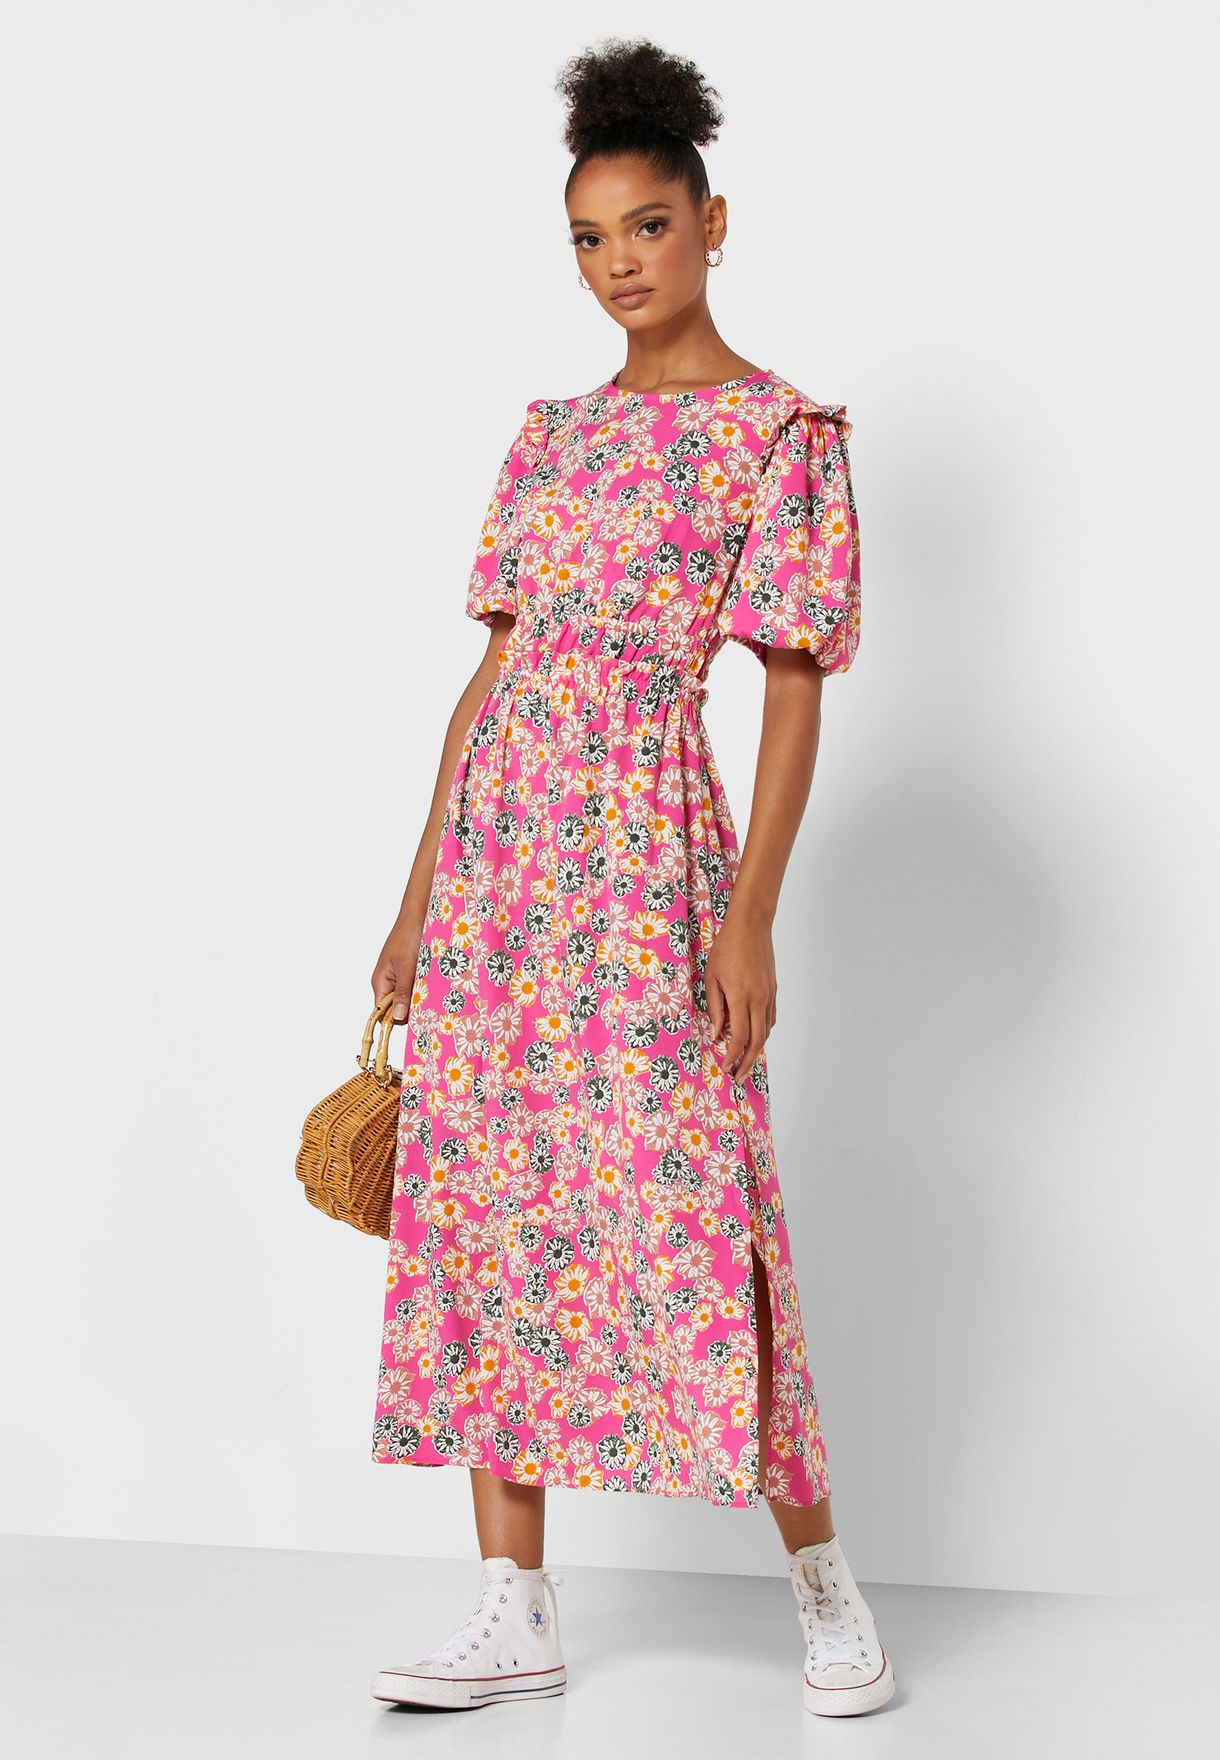 Buy Topshop prints Floral Print Puff Sleeve Pleated Dress for Women in ...